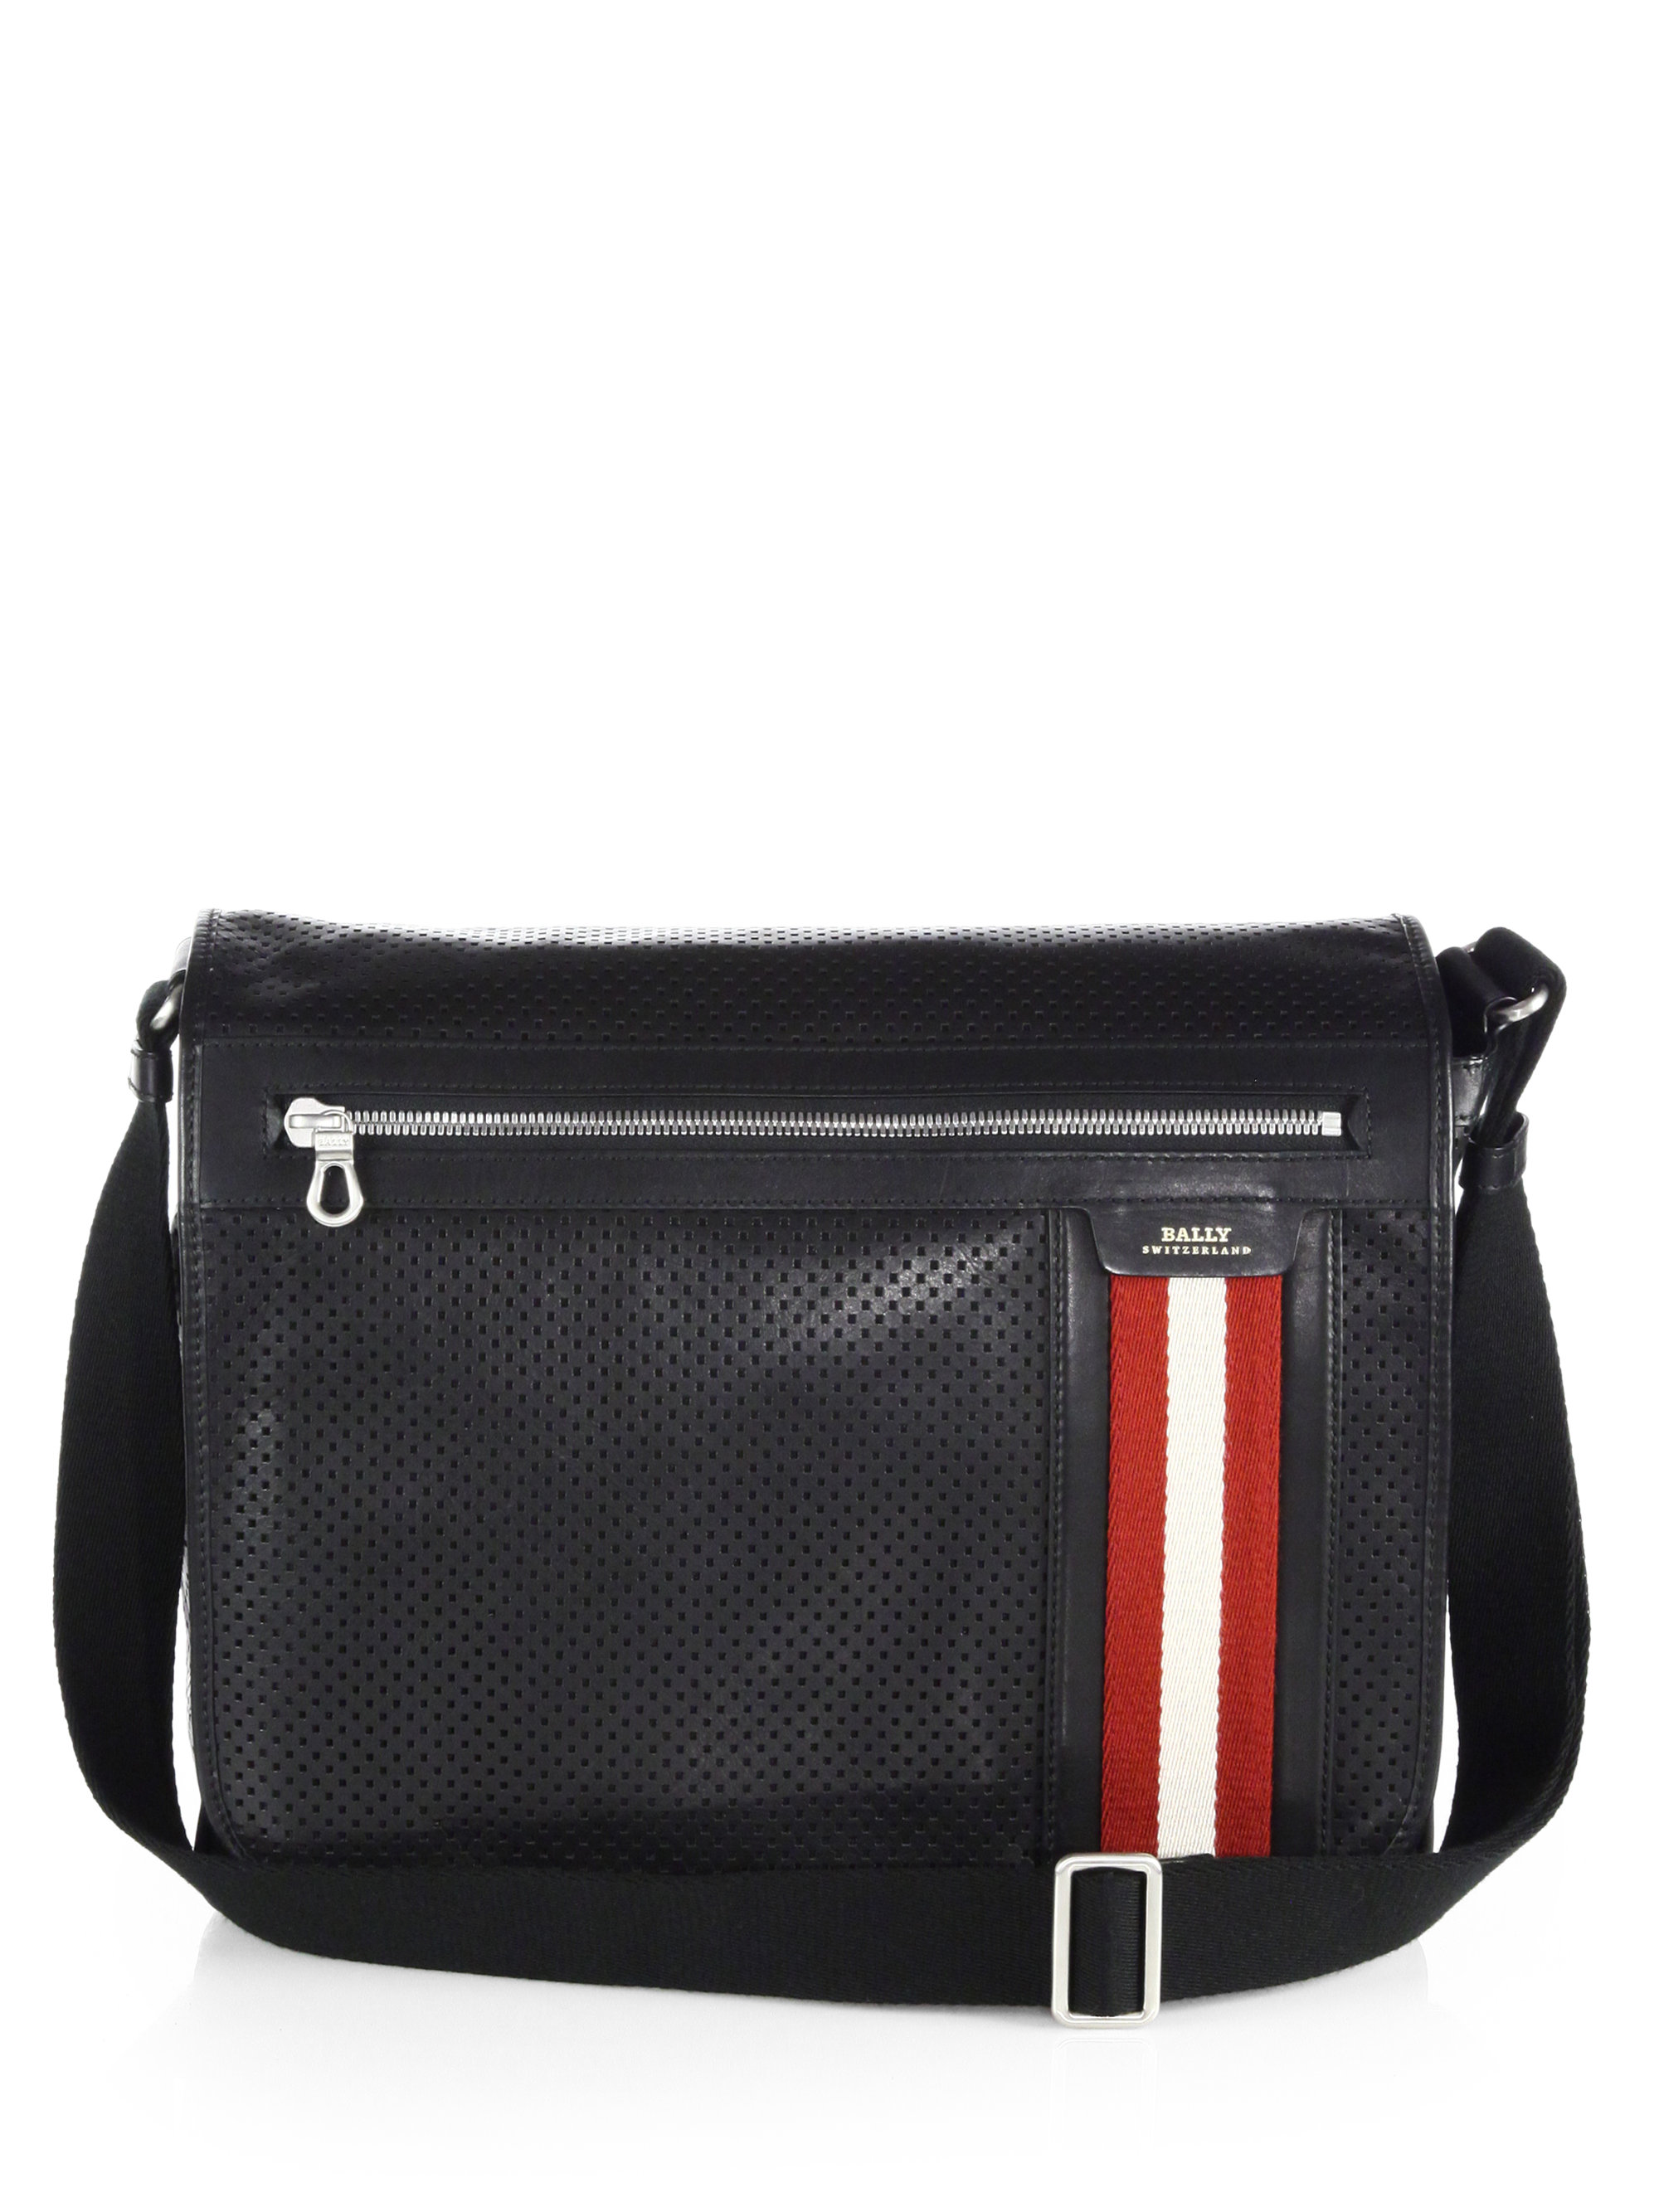 Lyst - Bally Perforated Leather Messenger in Black for Men